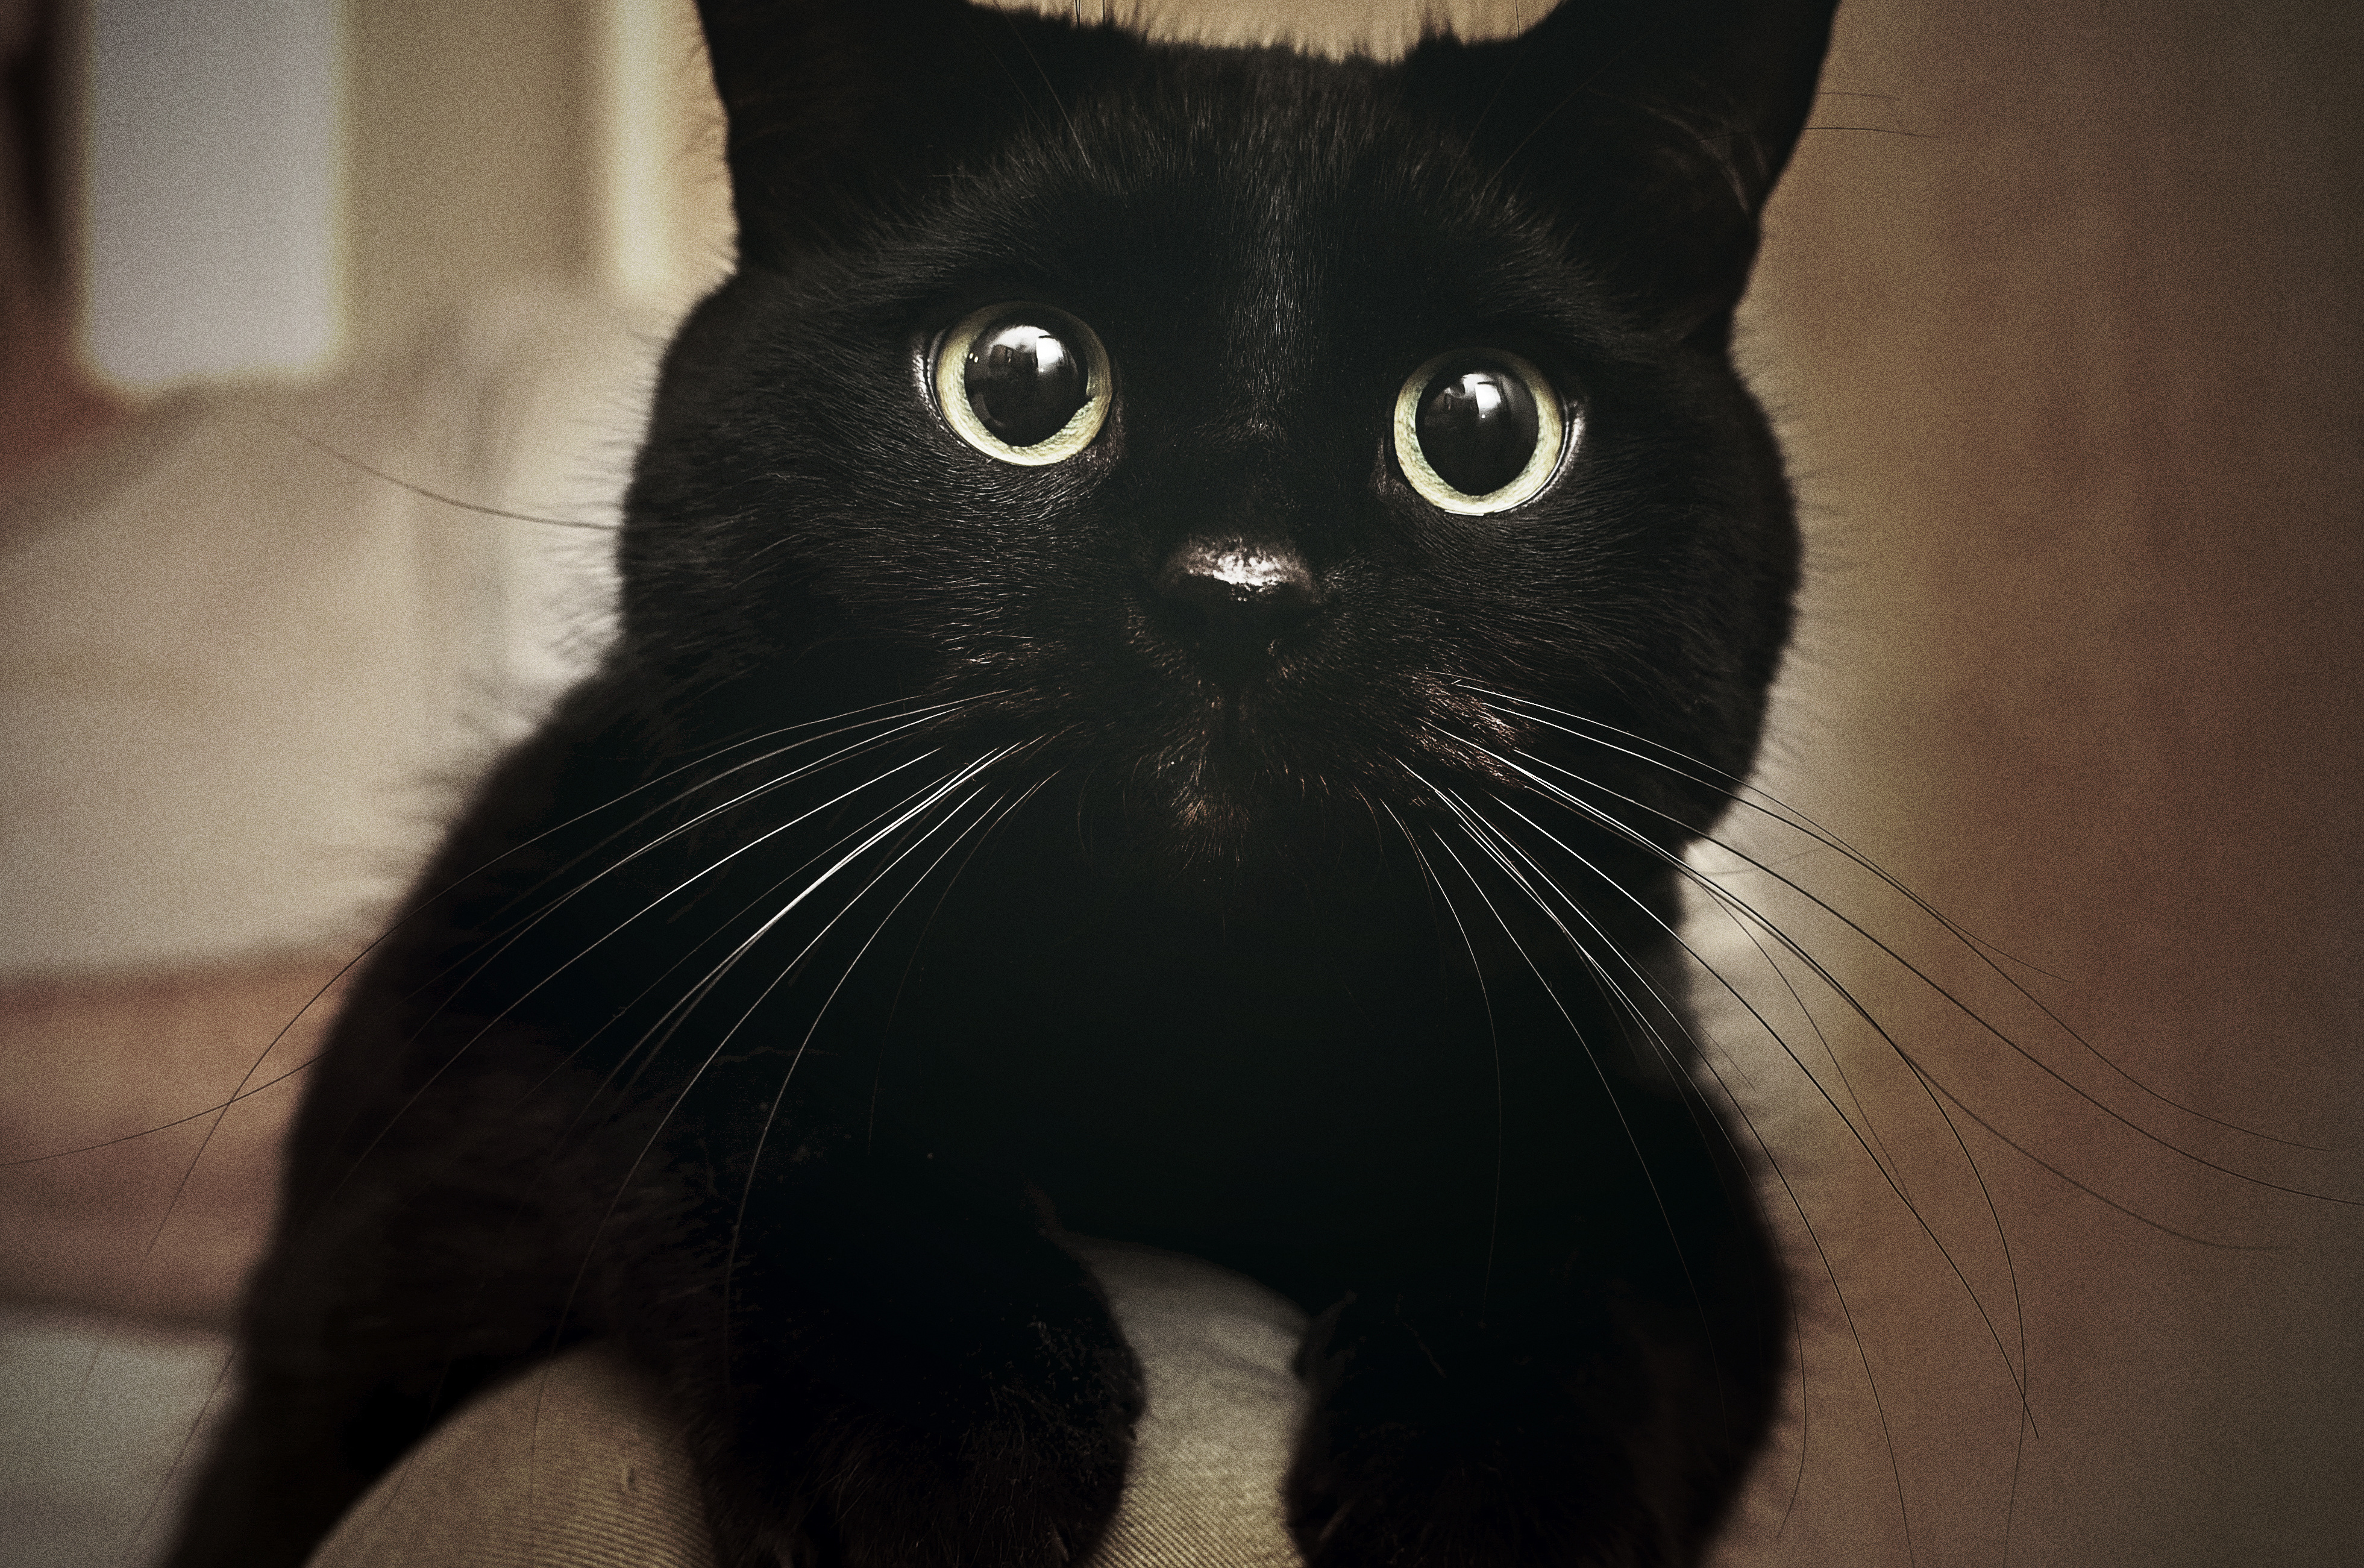 Black Cats Aren\'t Getting Adopted Because They Look Bad in Selfies